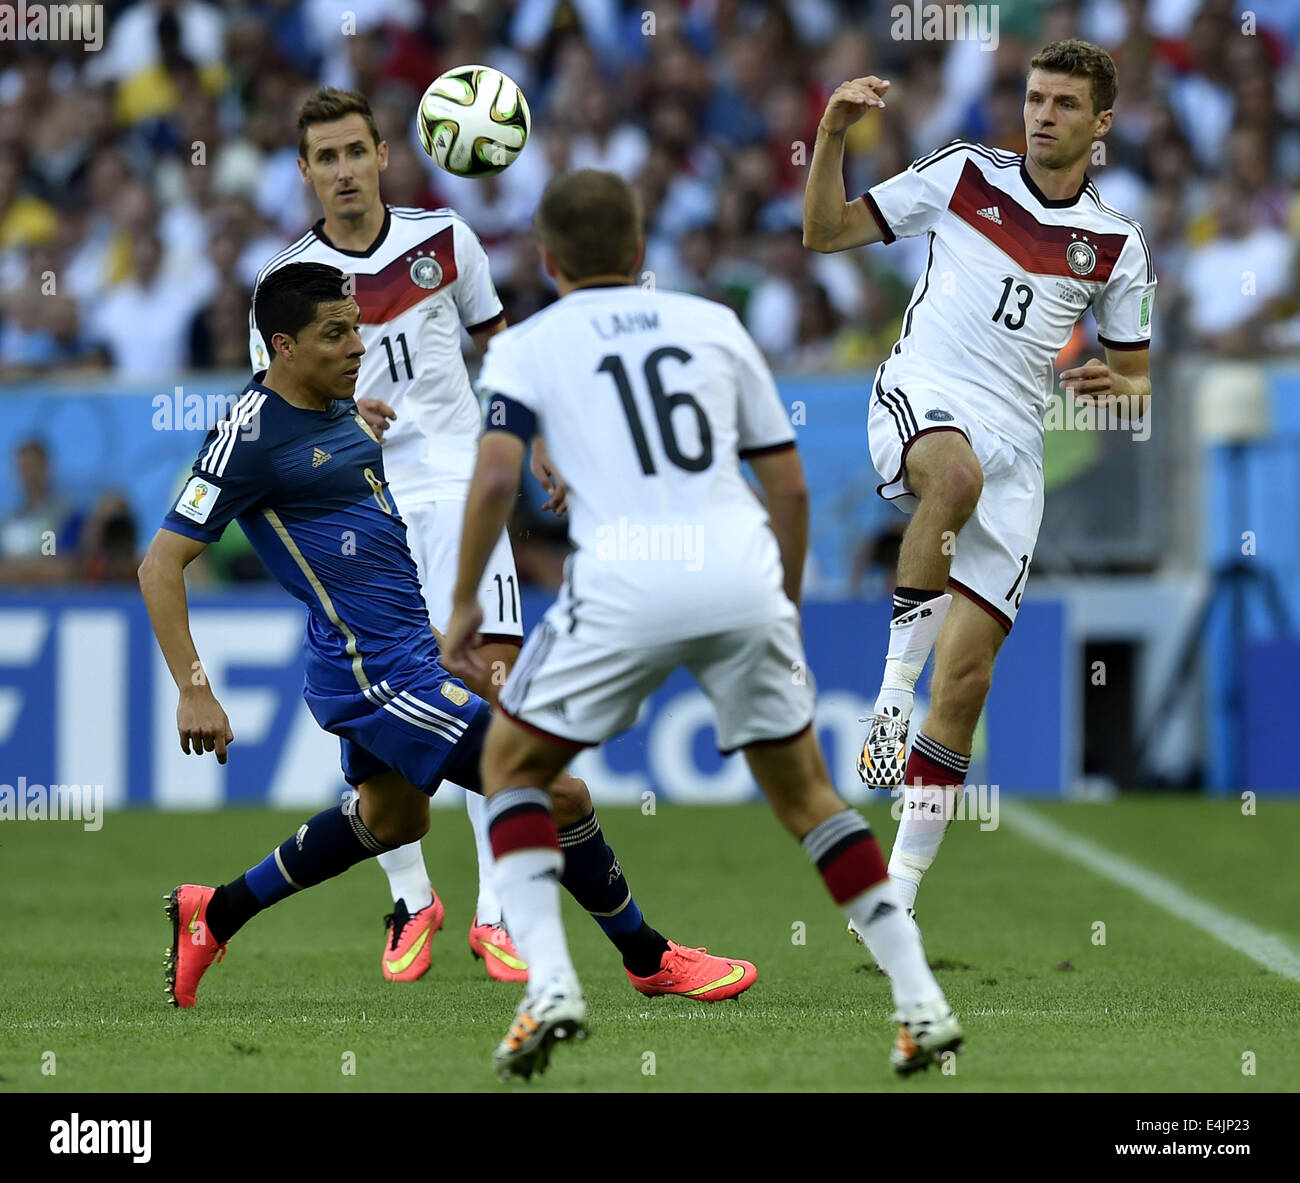 Rio De Janeiro, Brazil. 13th July, 2014. Germany's Thomas Mulle (R) vies with Argentina's Enzo Perez (L) during the final match between Germany and Argentina of 2014 FIFA World Cup at the Estadio do Maracana Stadium in Rio de Janeiro, Brazil, on July 13, 2014. Credit:  Li Ga/Xinhua/Alamy Live News Stock Photo